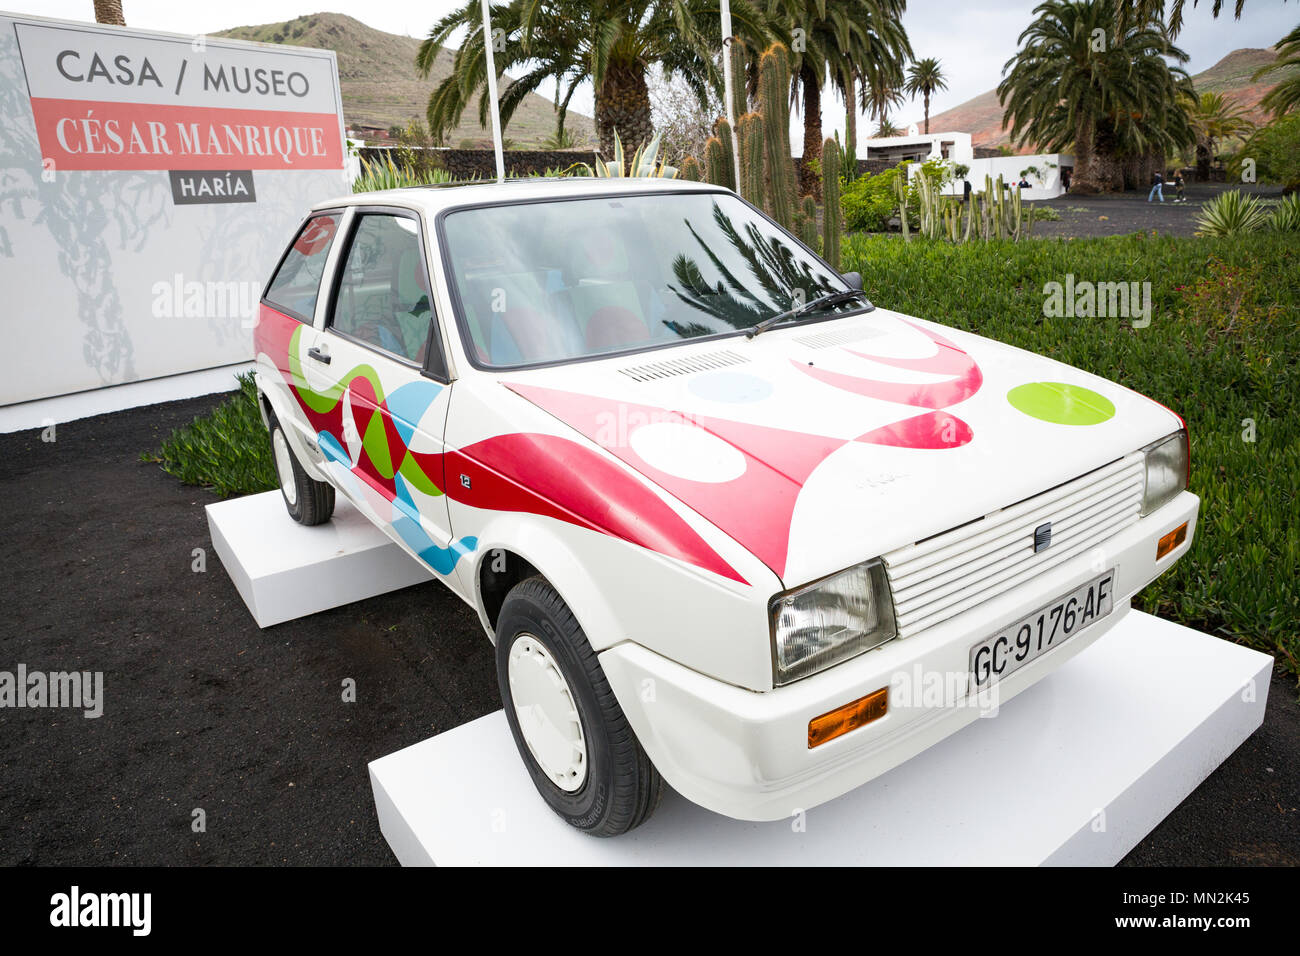 HARIA, LANZAROTE, CANARY ISLANDS, SPAIN: The famous Cicar: A special edition Seat Ibiza designed by the artist Cesar Manrique. Stock Photo